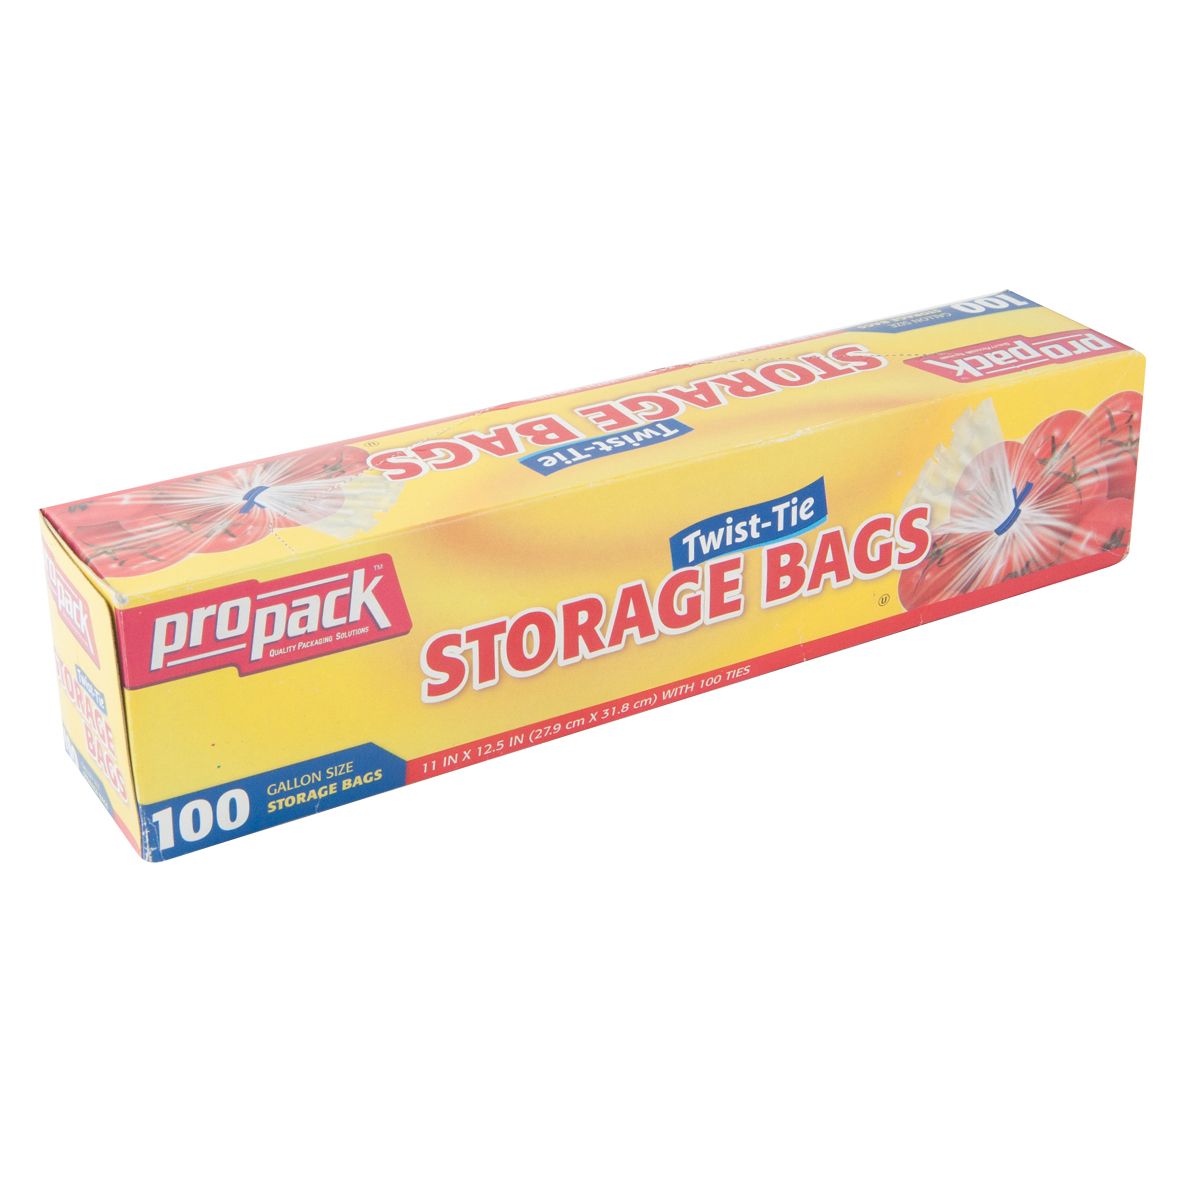  ProPack Disposable Plastic Storage Bags with Original Twist  Tie, 1 Gallon Size, 400 Bags, Great for Home, Office, Vacation, Traveling,  Sandwich, Fruits, Nuts, Cake, Cookies, Or Any Snacks (4 Packs) 